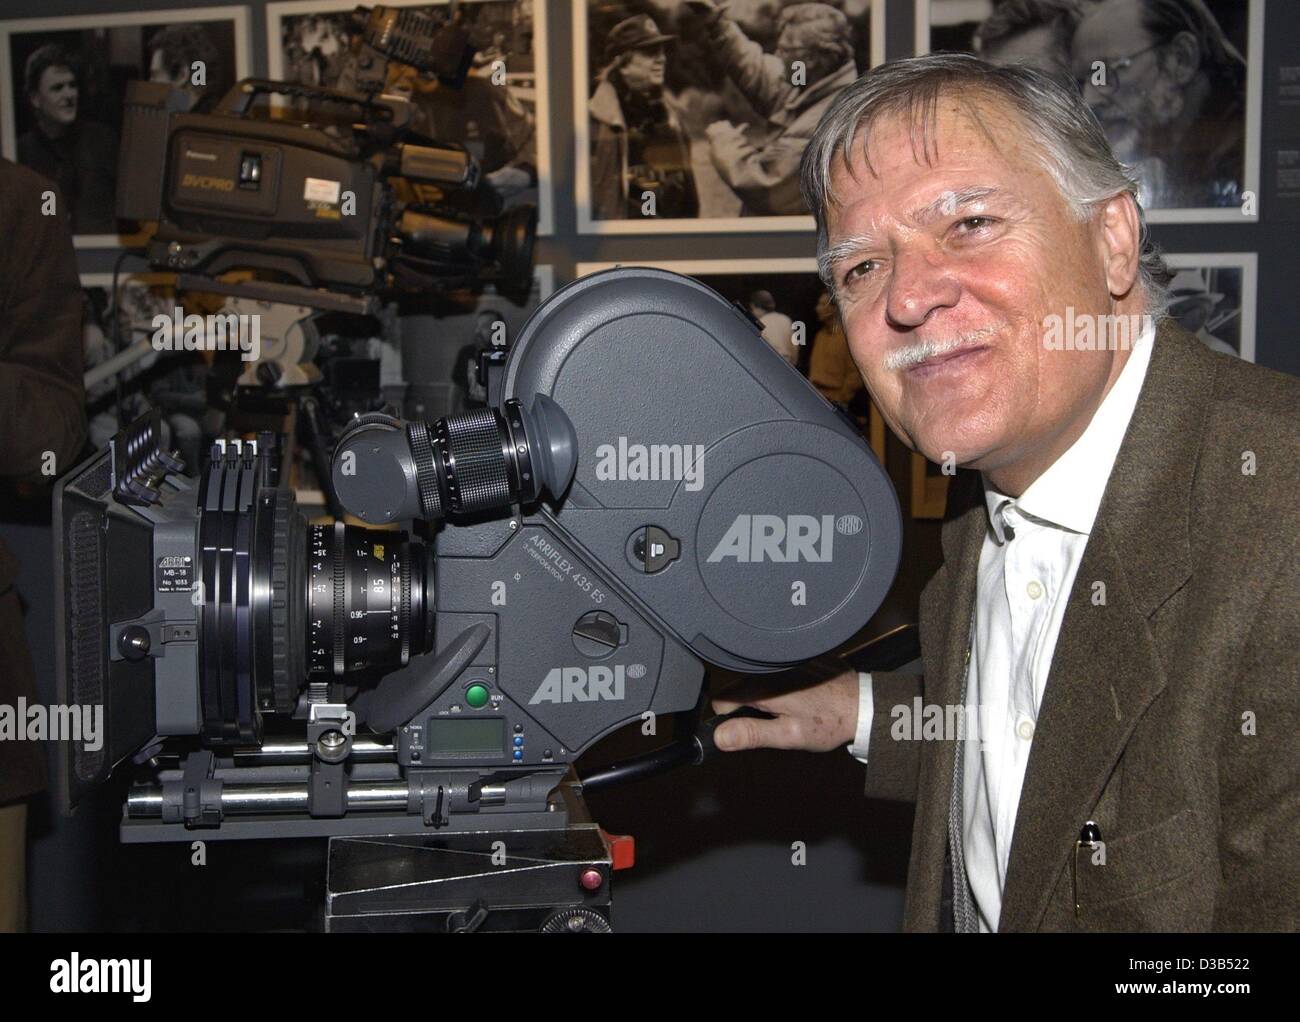 (dpa files) - German star cinematographer Michael Ballhaus pictured at a 35mm movie camera in the Film Museum in Berlin, 22 November 2001. Born on 5 August 1935 in Eichelsdorf, Germany, Ballhaus started his career in Germany, shooting 15 of Fassbinder's films. In Hollywood he has worked as Director  Stock Photo